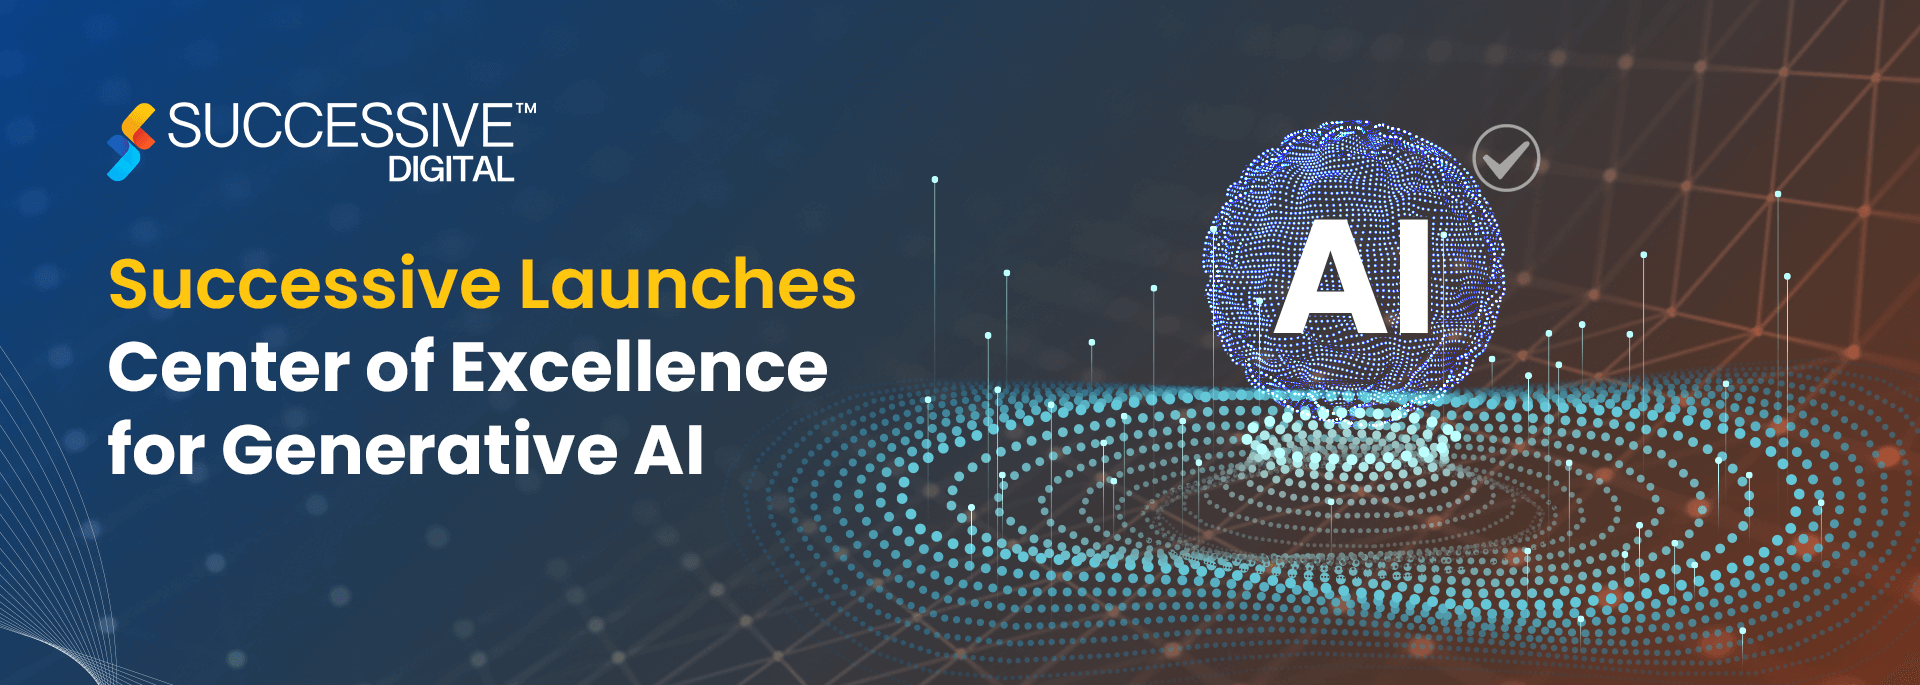 Successive Launches Center of Excellence for Generative AI